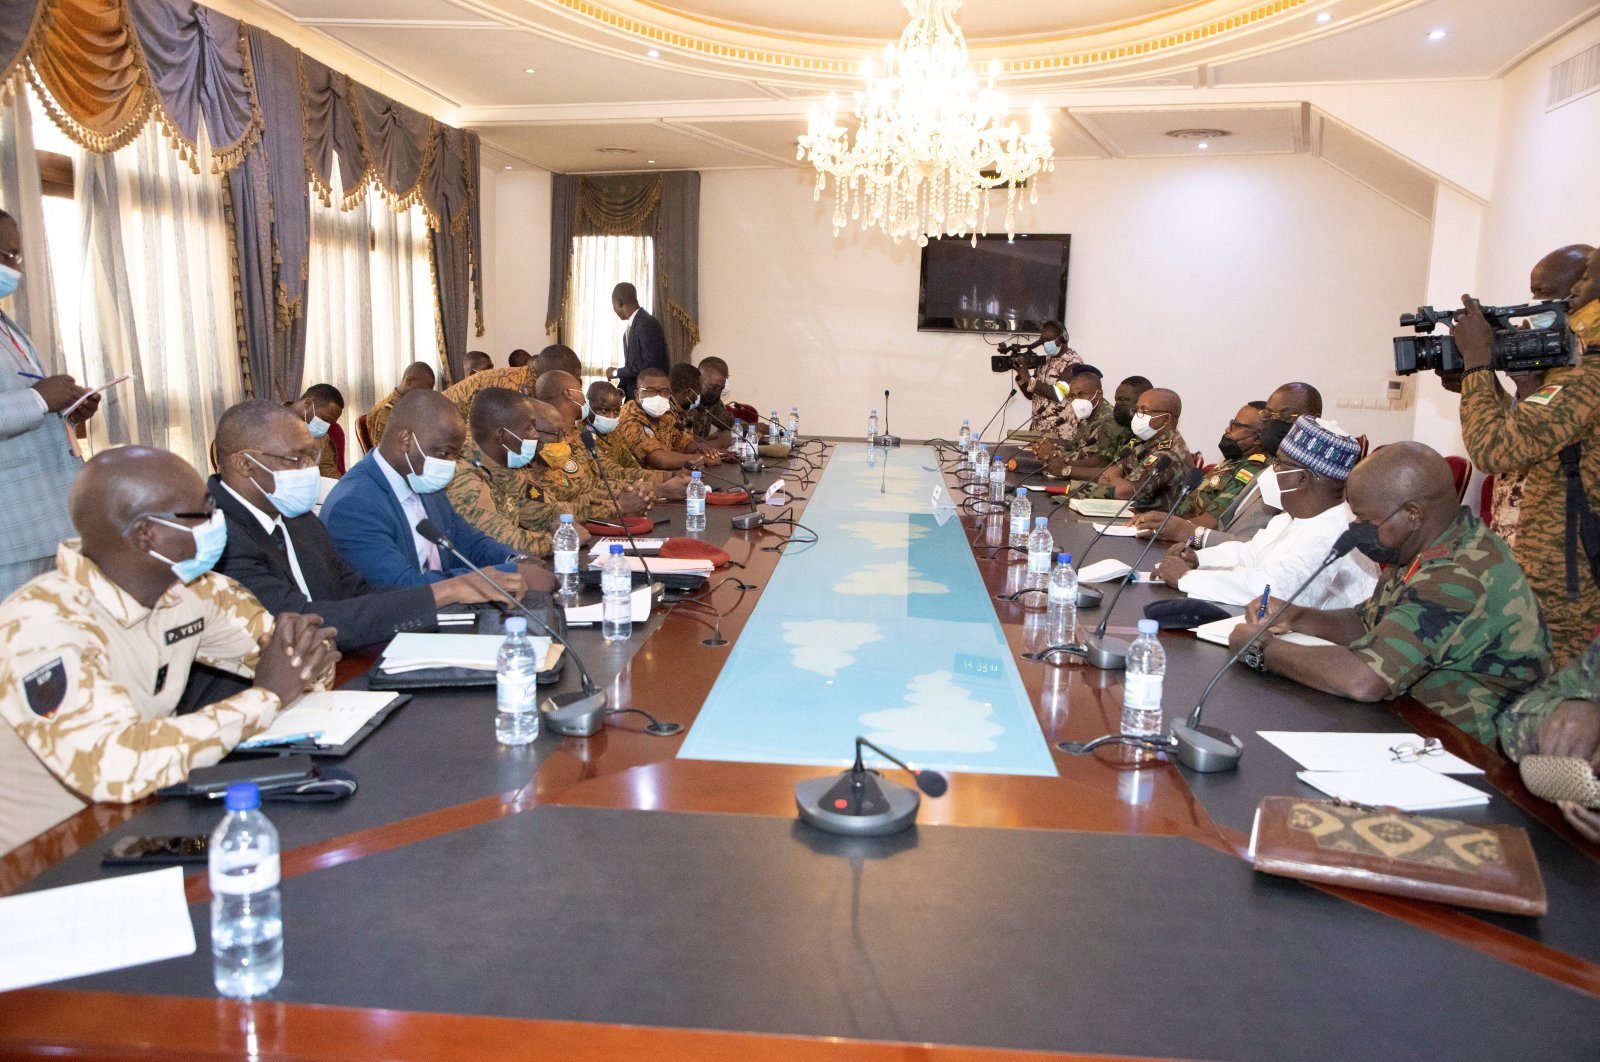 Representatives from the ECOWAS council of ministers meet with leaders of the military coup that ousted President Roch Kabore, in Ouagadougou, Burkina Faso, Jan. 29, 2022. (Reuters Photo)